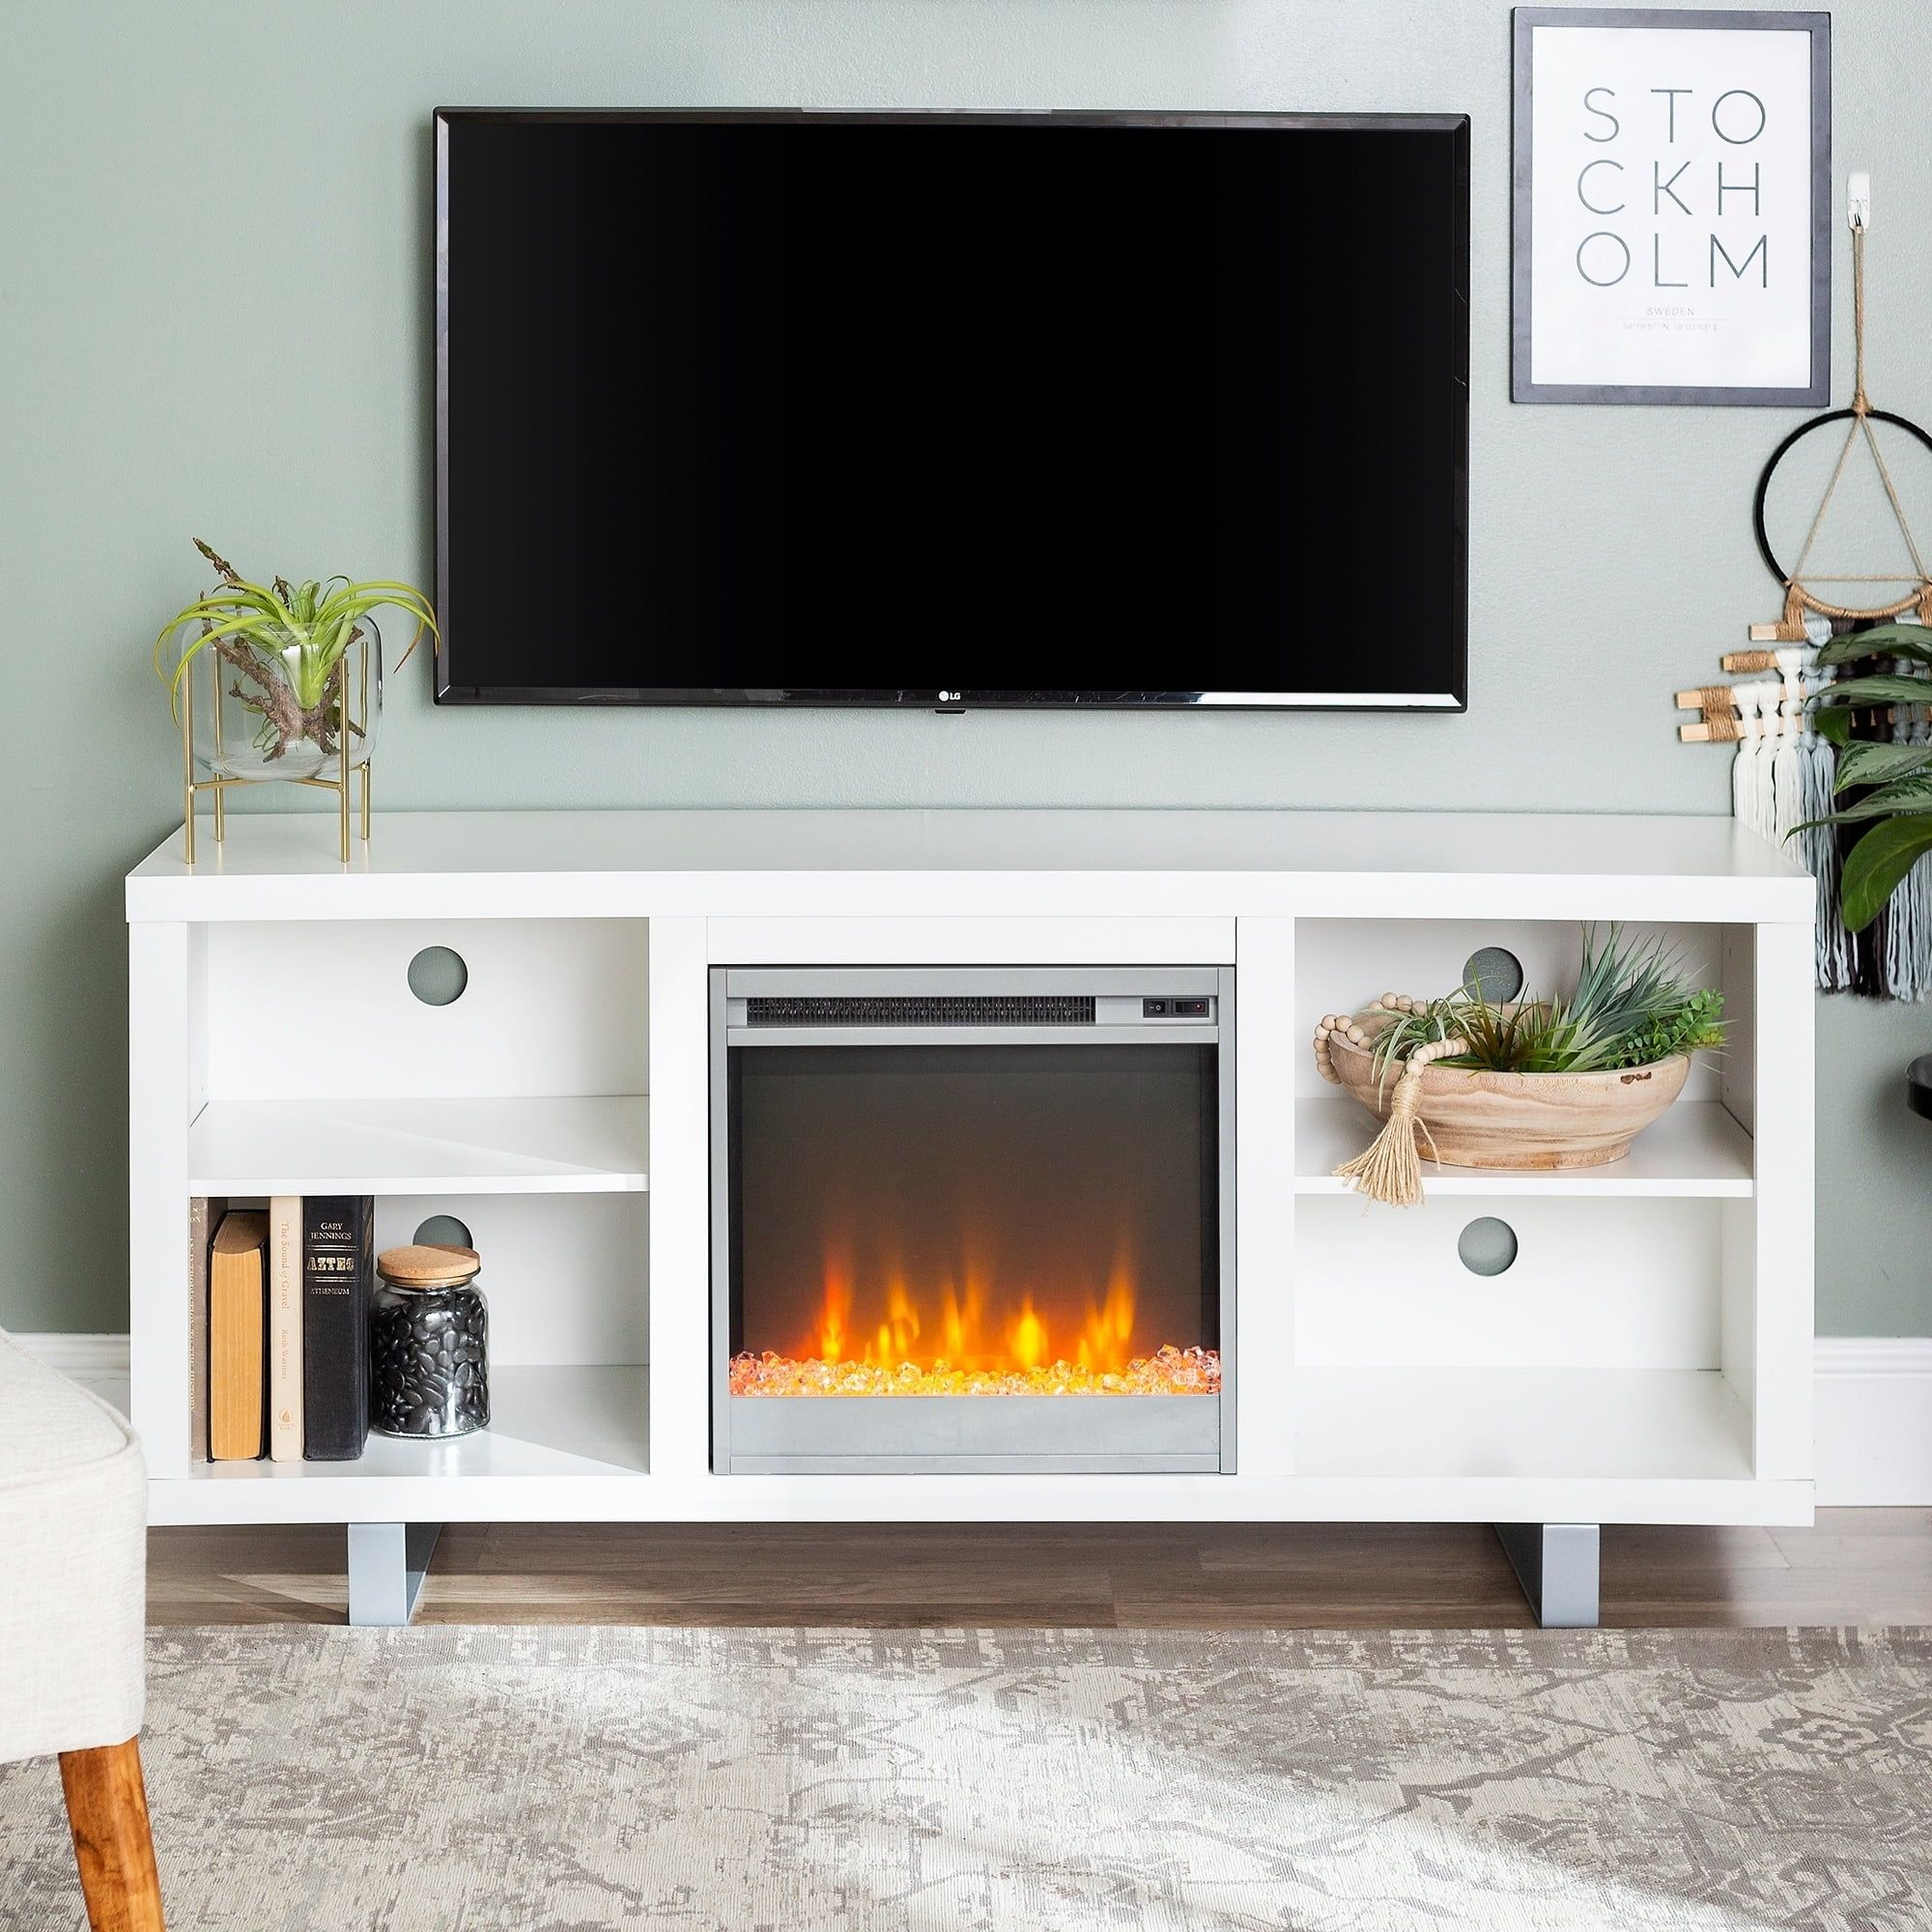 Middlebrook Designs 58 Inch Modern Fireplace Tv Stand Console With Open Throughout Modern Fireplace Tv Stands (Gallery 3 of 20)